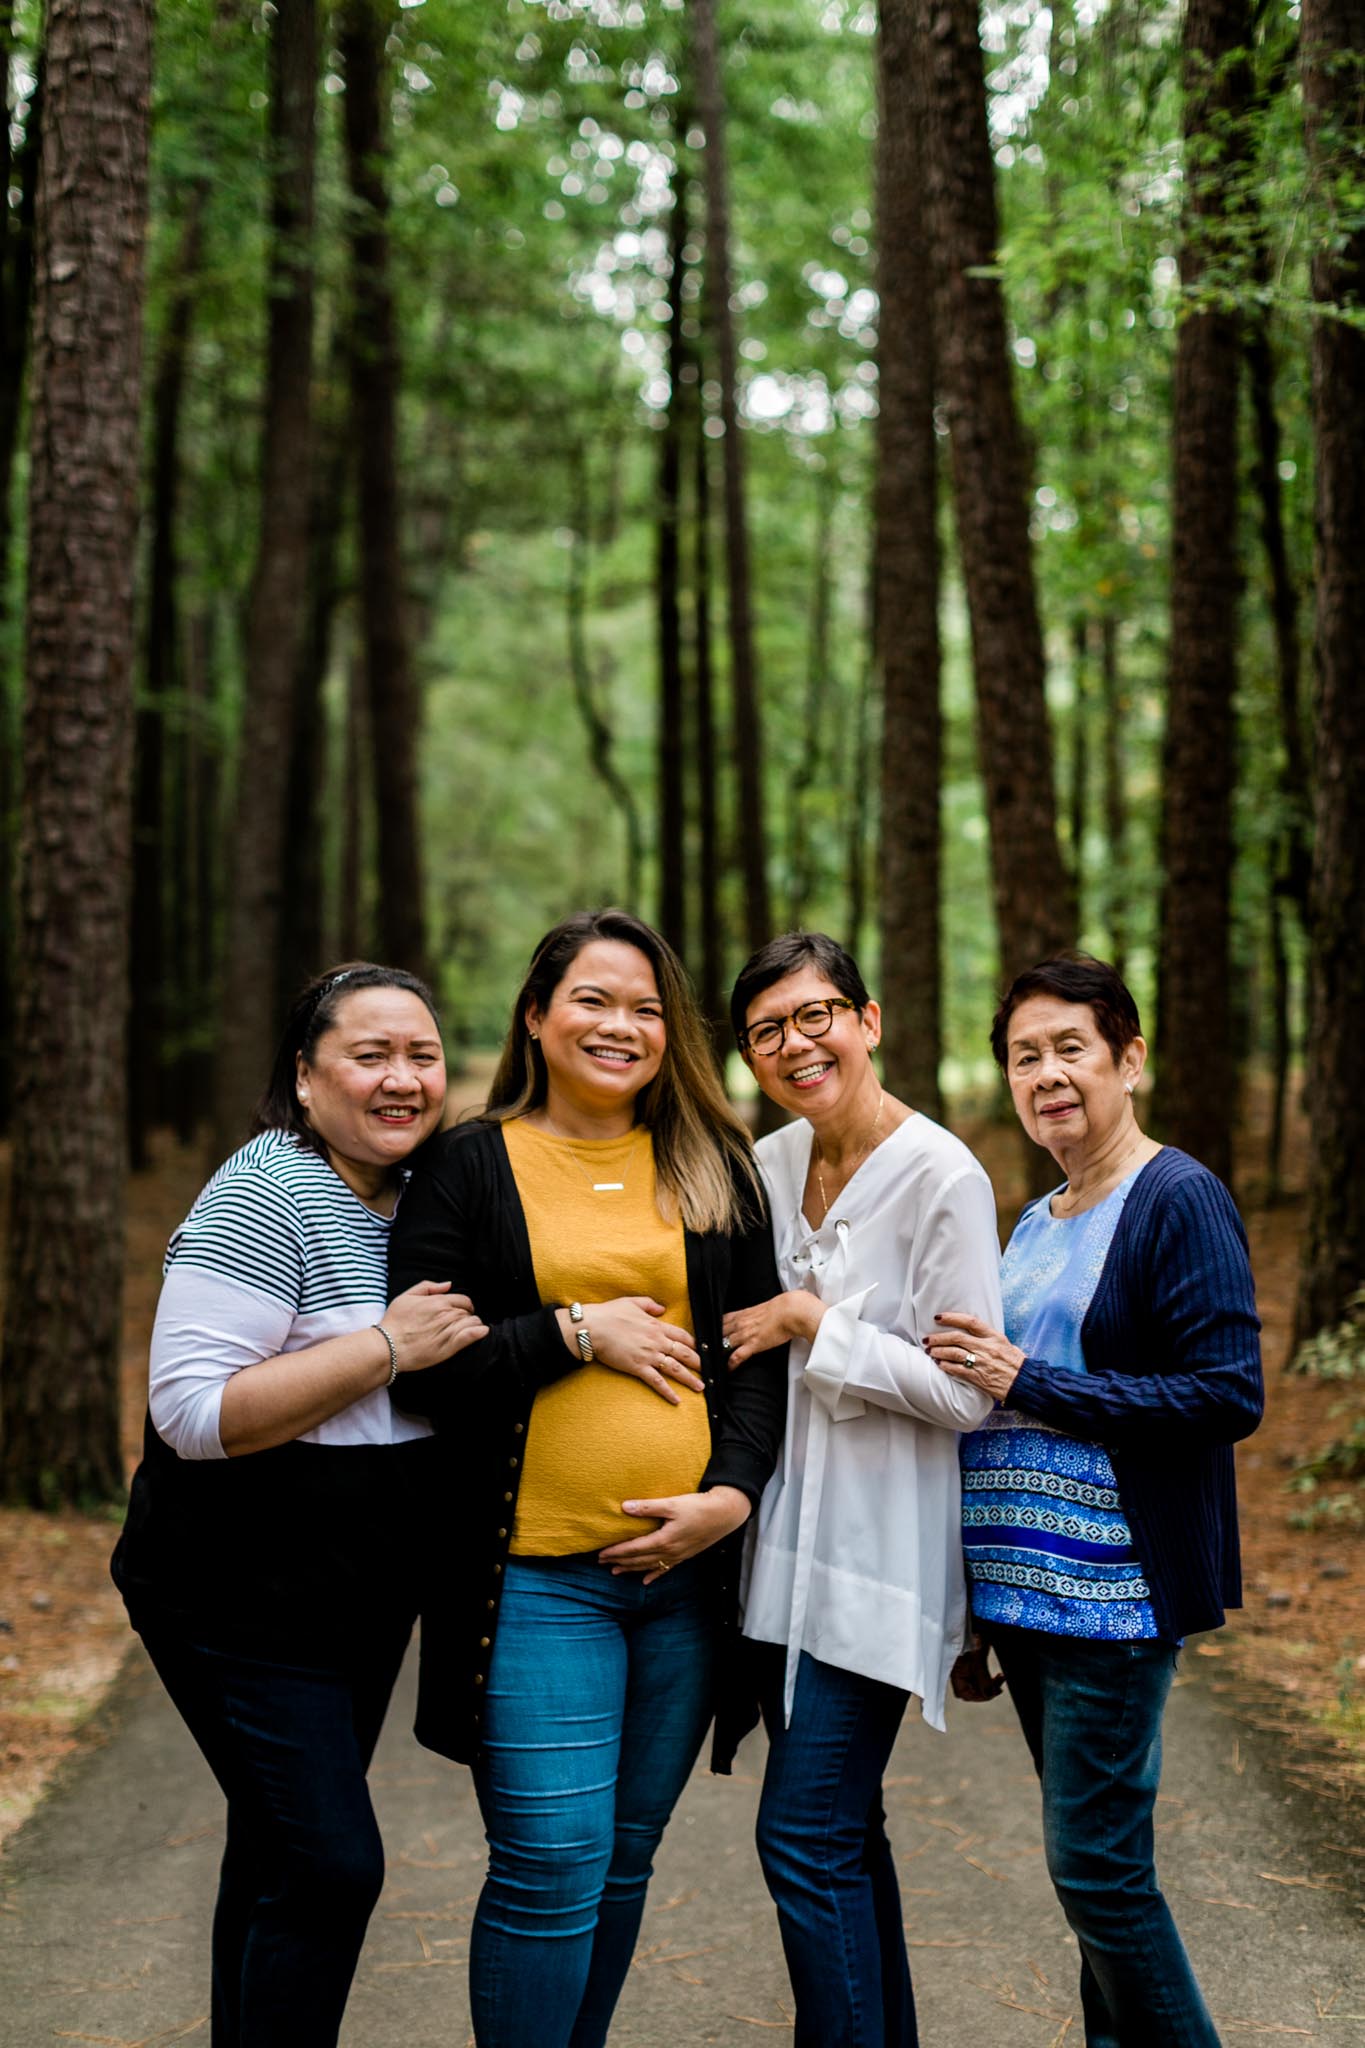 Raleigh Family Photographer | By G. Lin Photography | Umstead Park | Outdoor maternity portrait at Umstead Park